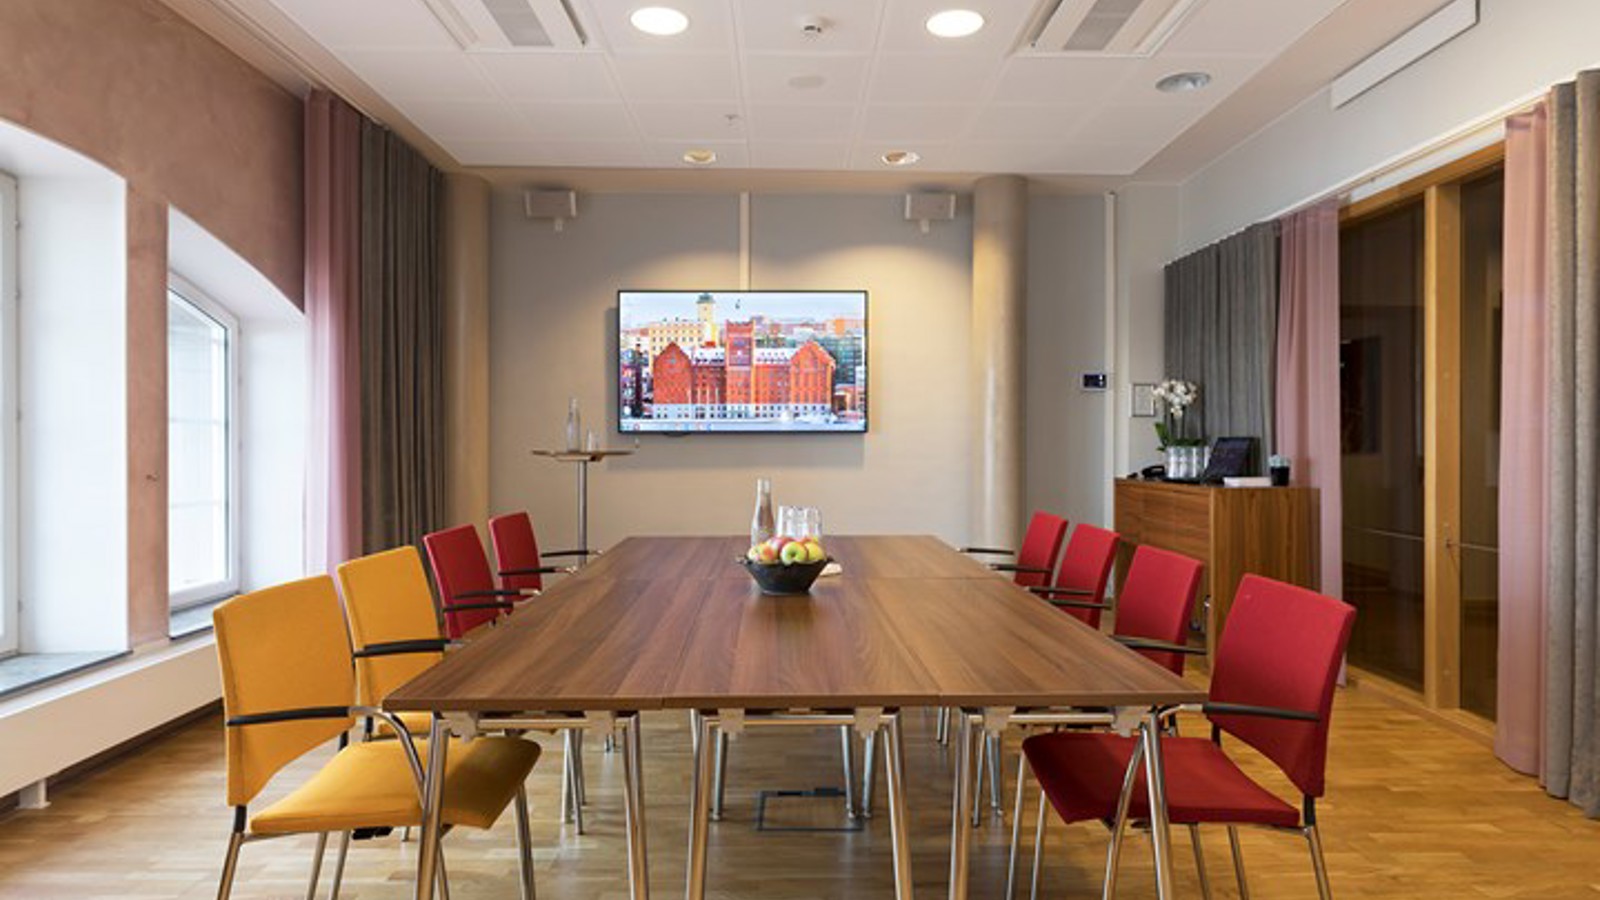 Board room with brown table, yellow and red chairs and large windows